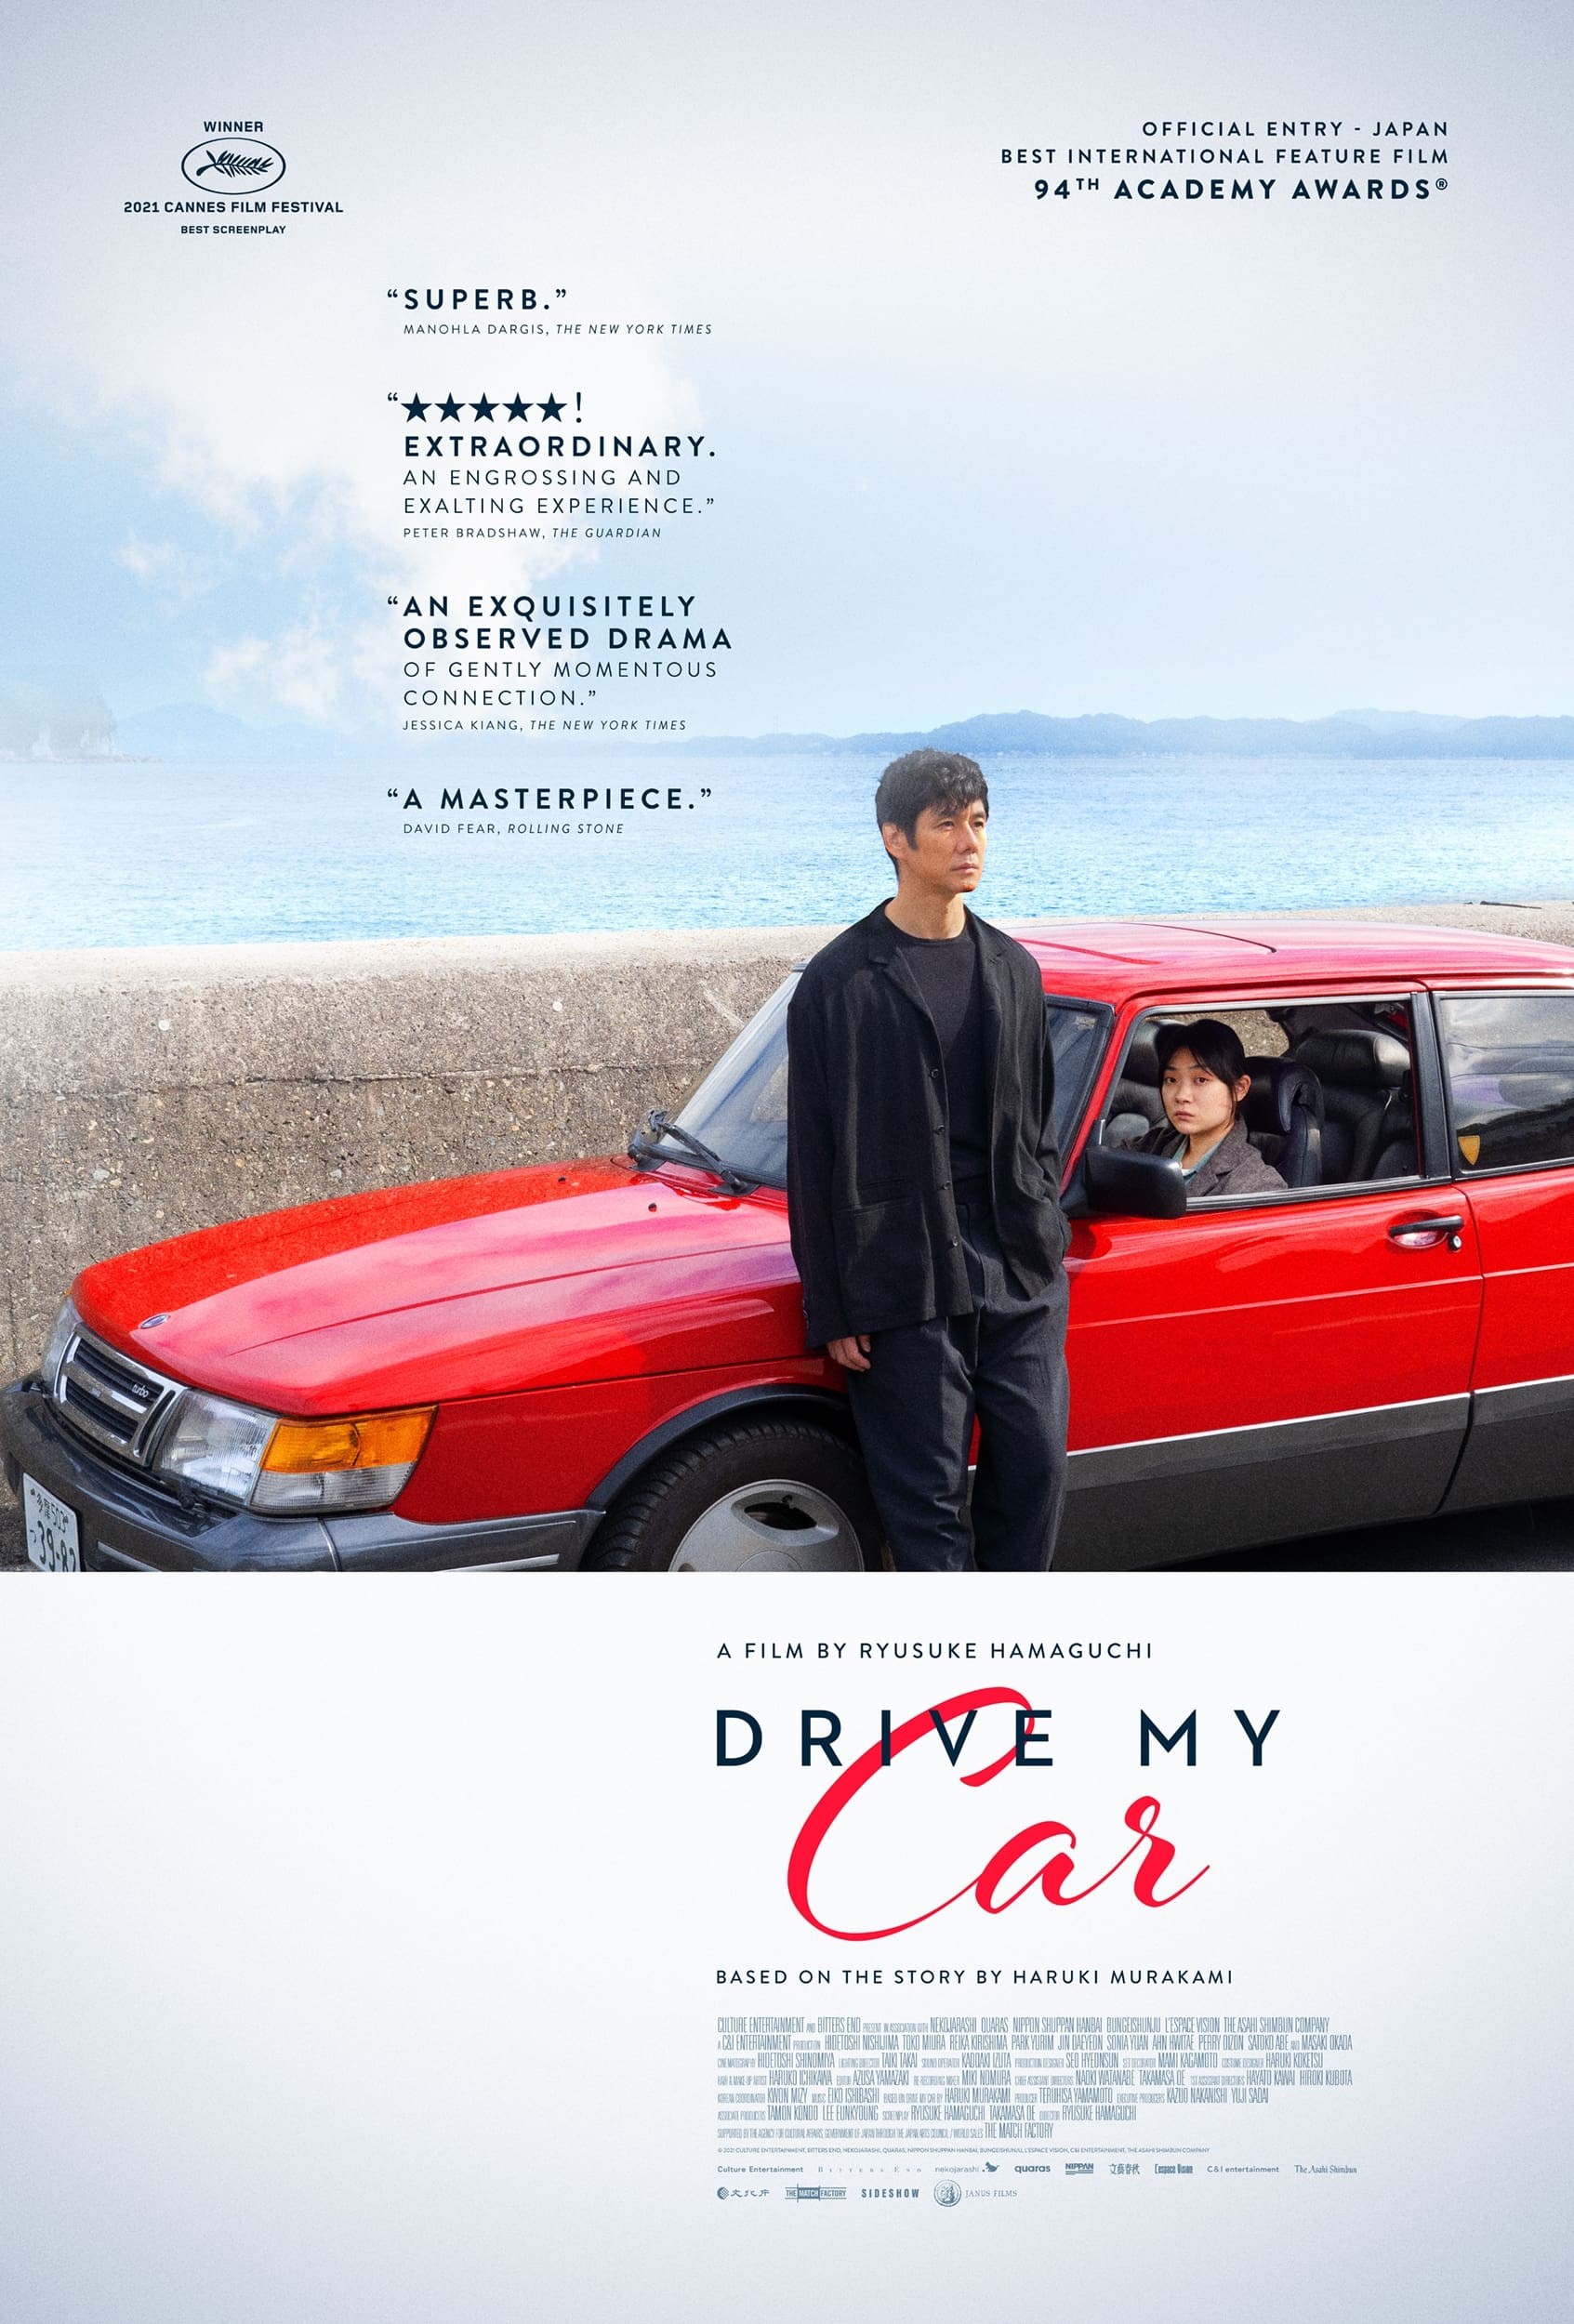 Drive my car review